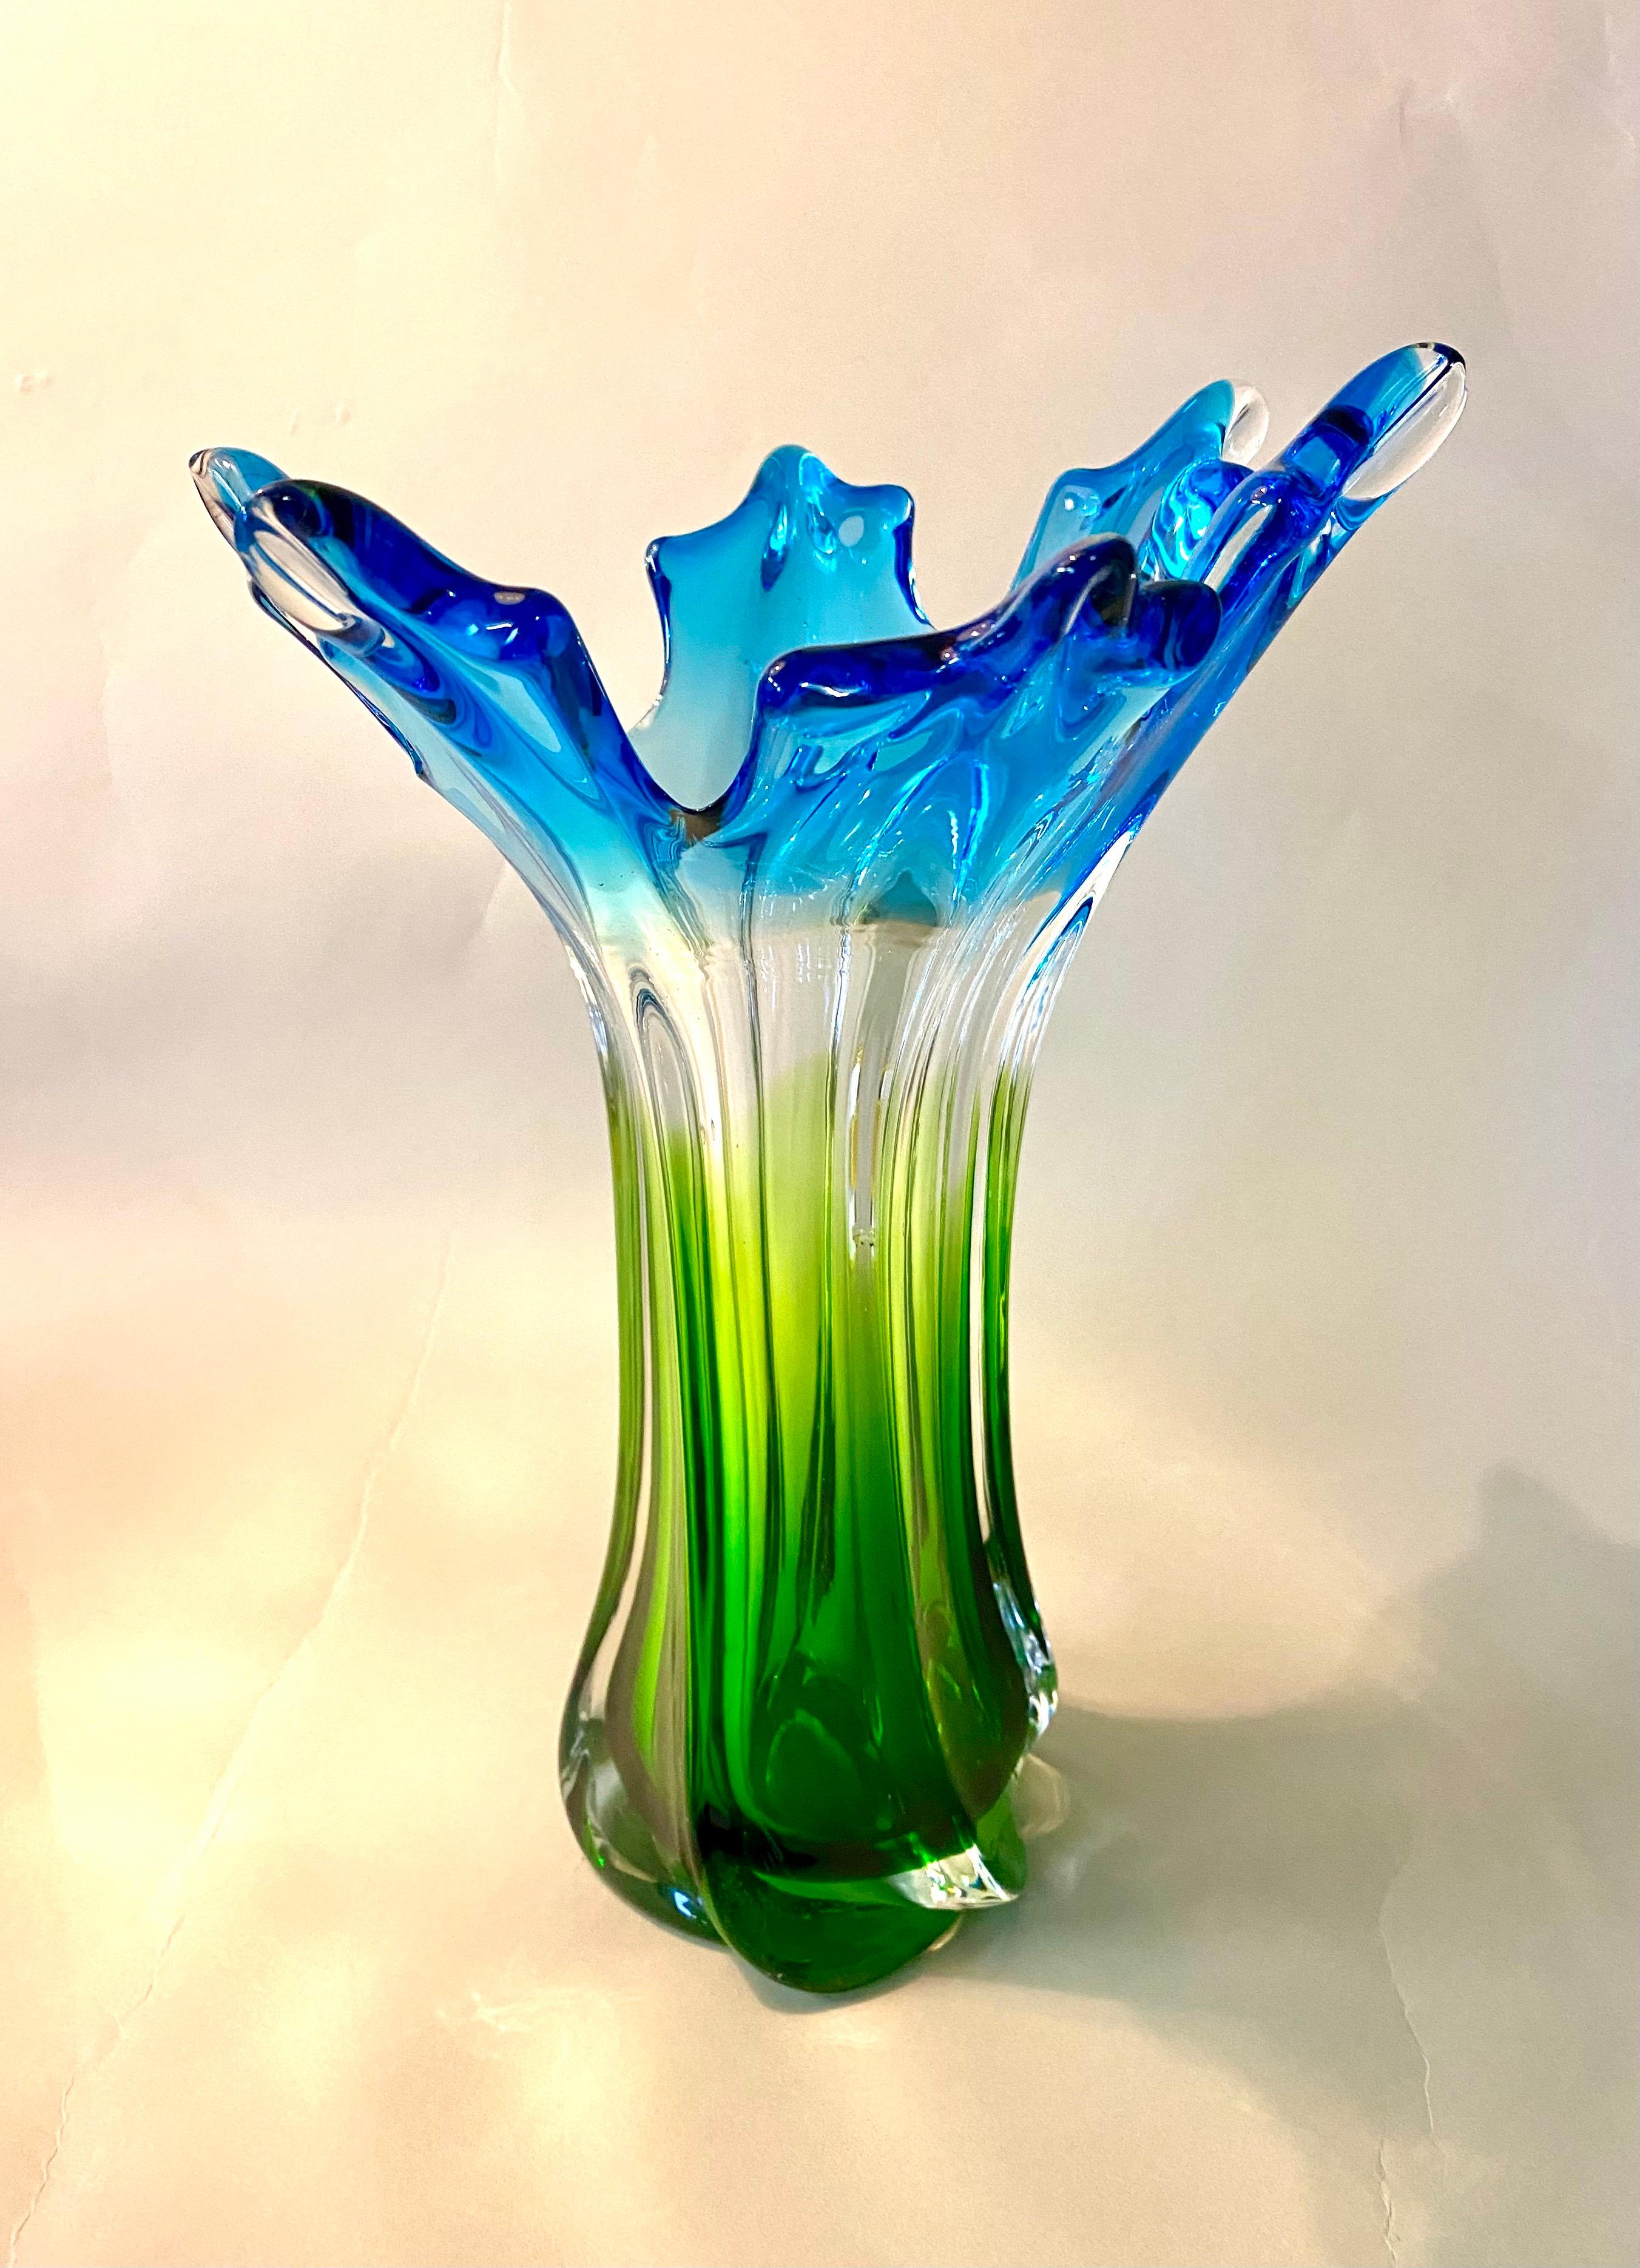 Delicate mid century murano glass vase from the famous workshops in Italy around 1960/70. An extraordinary shaped body combined with an amazing coloration. From different blue tones over clear glass to a beautiful shining green on the base makes